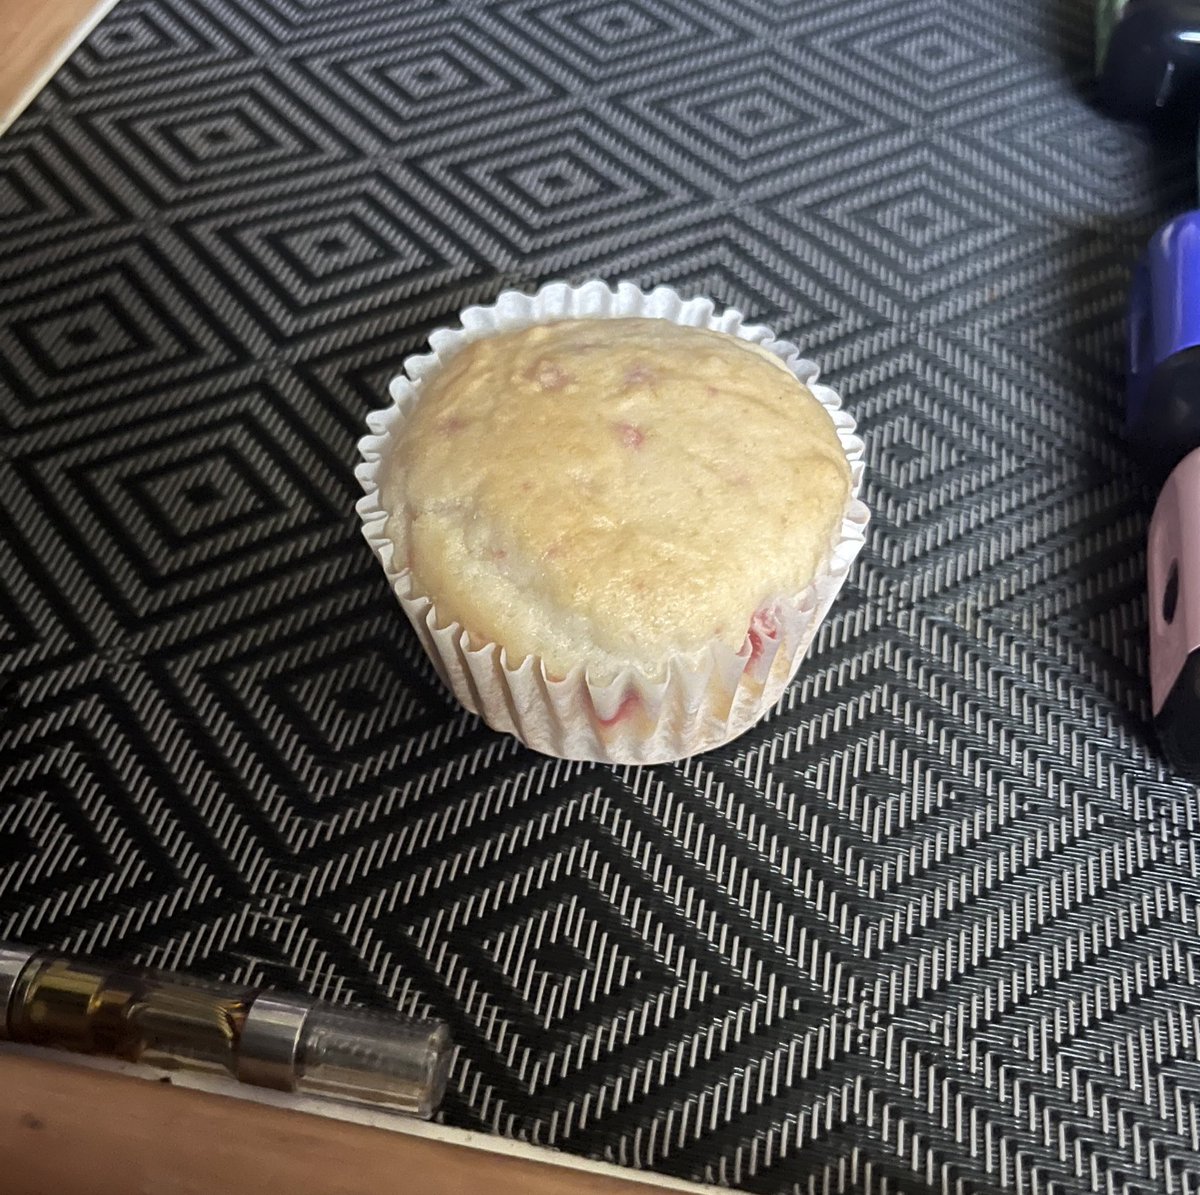 Muffin :) 145 calories